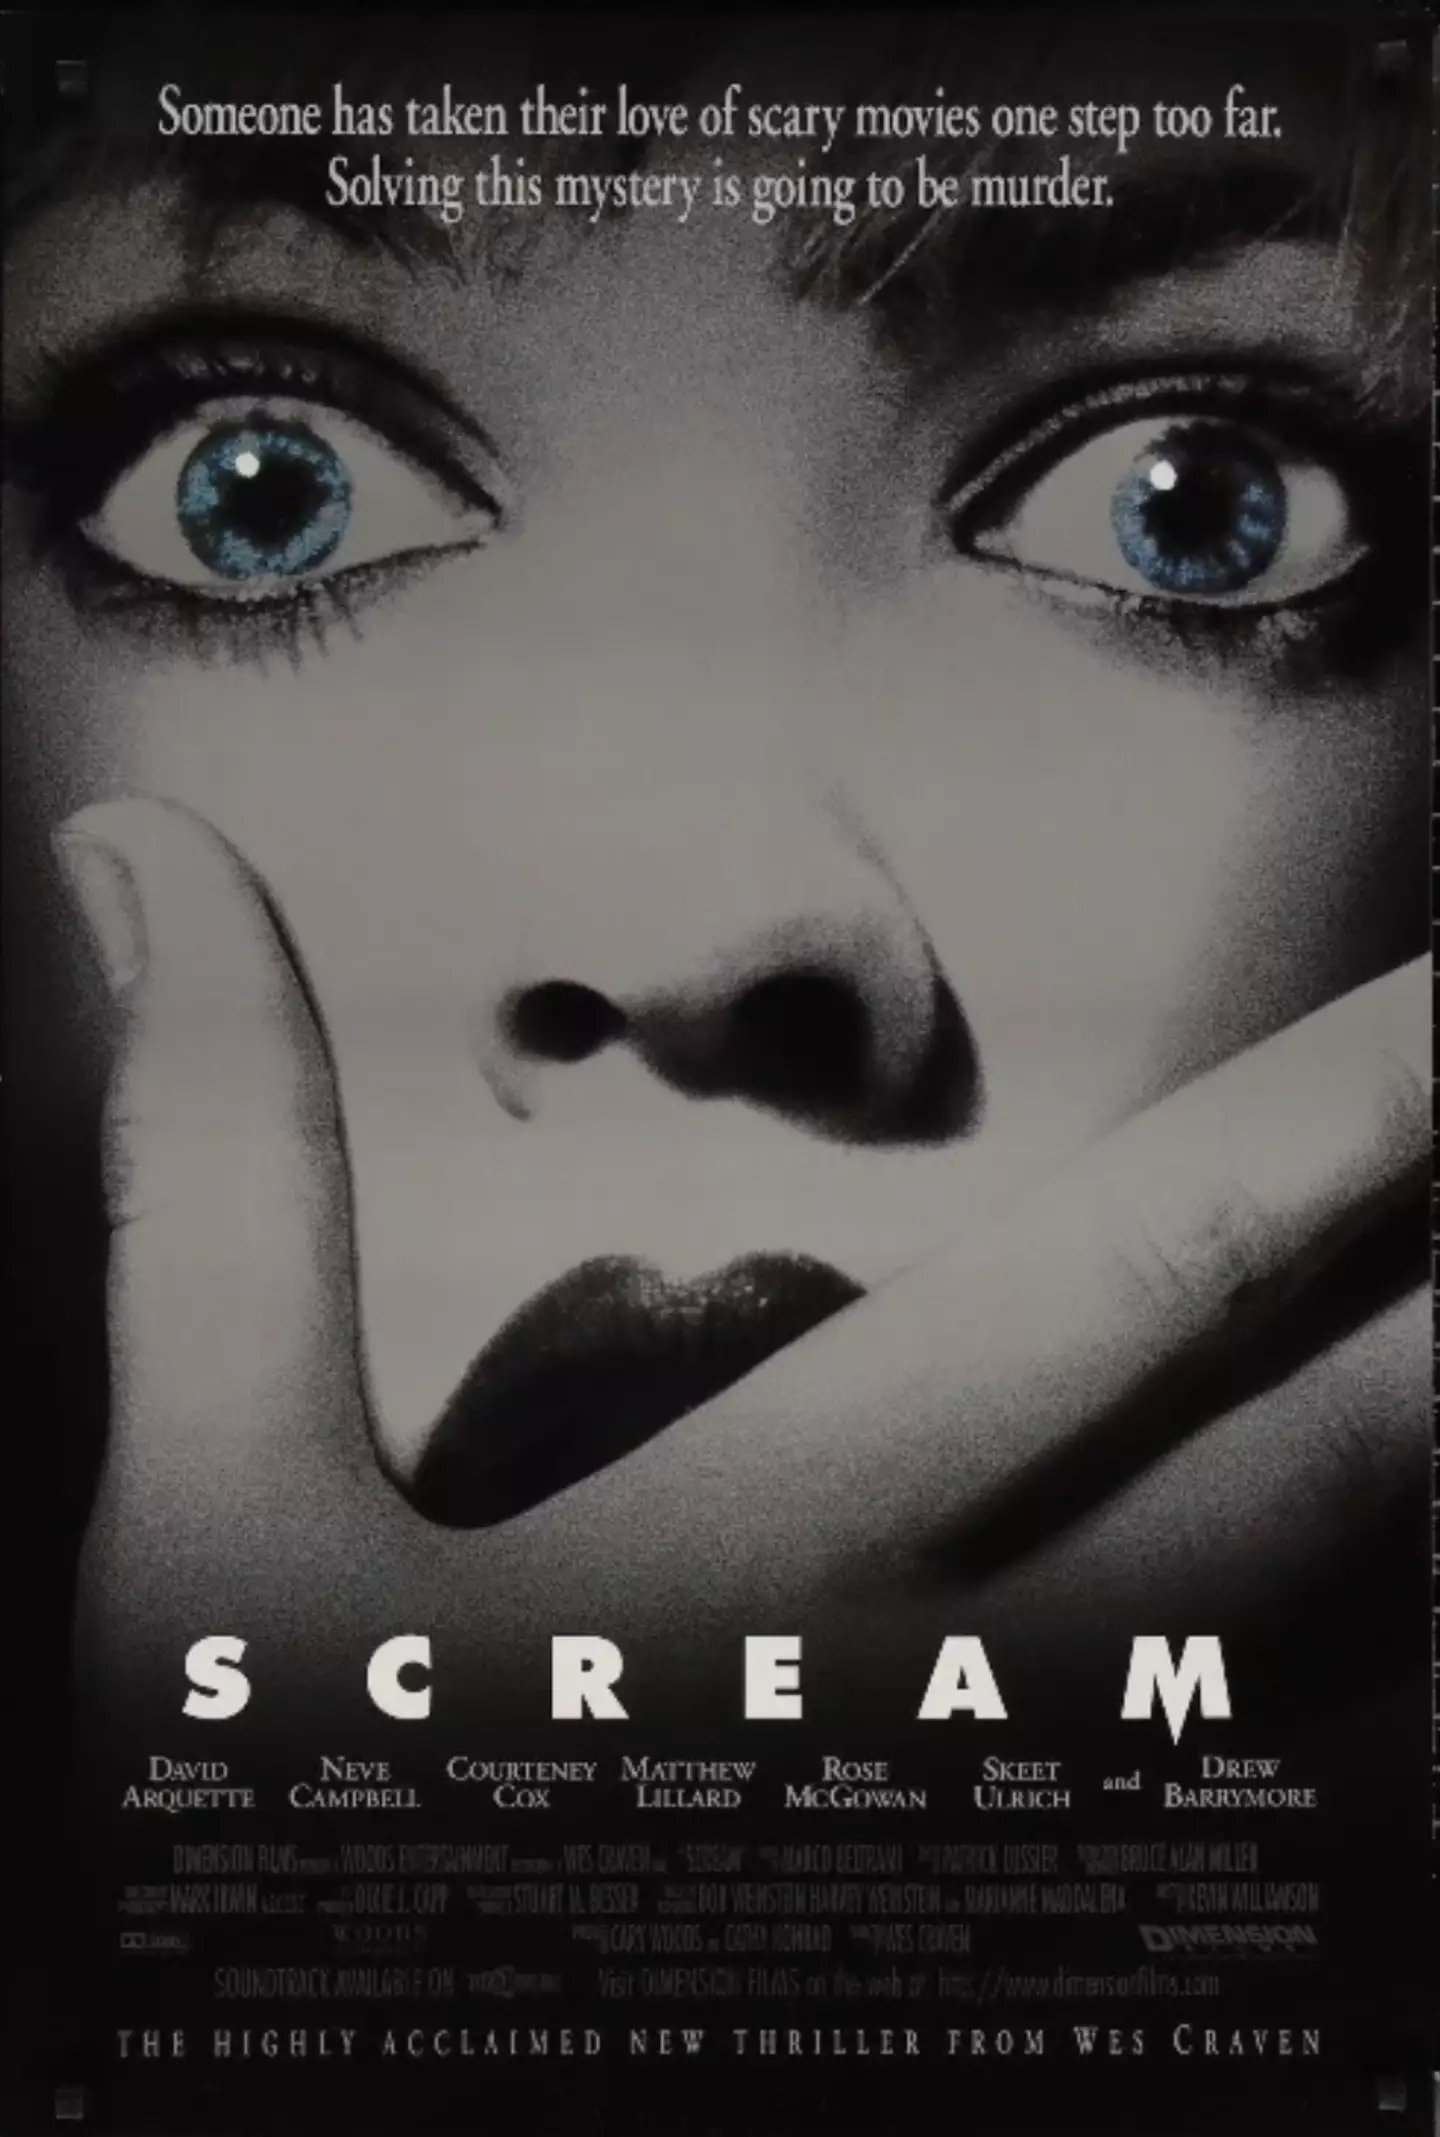 Scream is one of the most well-known horror films of the 90s.